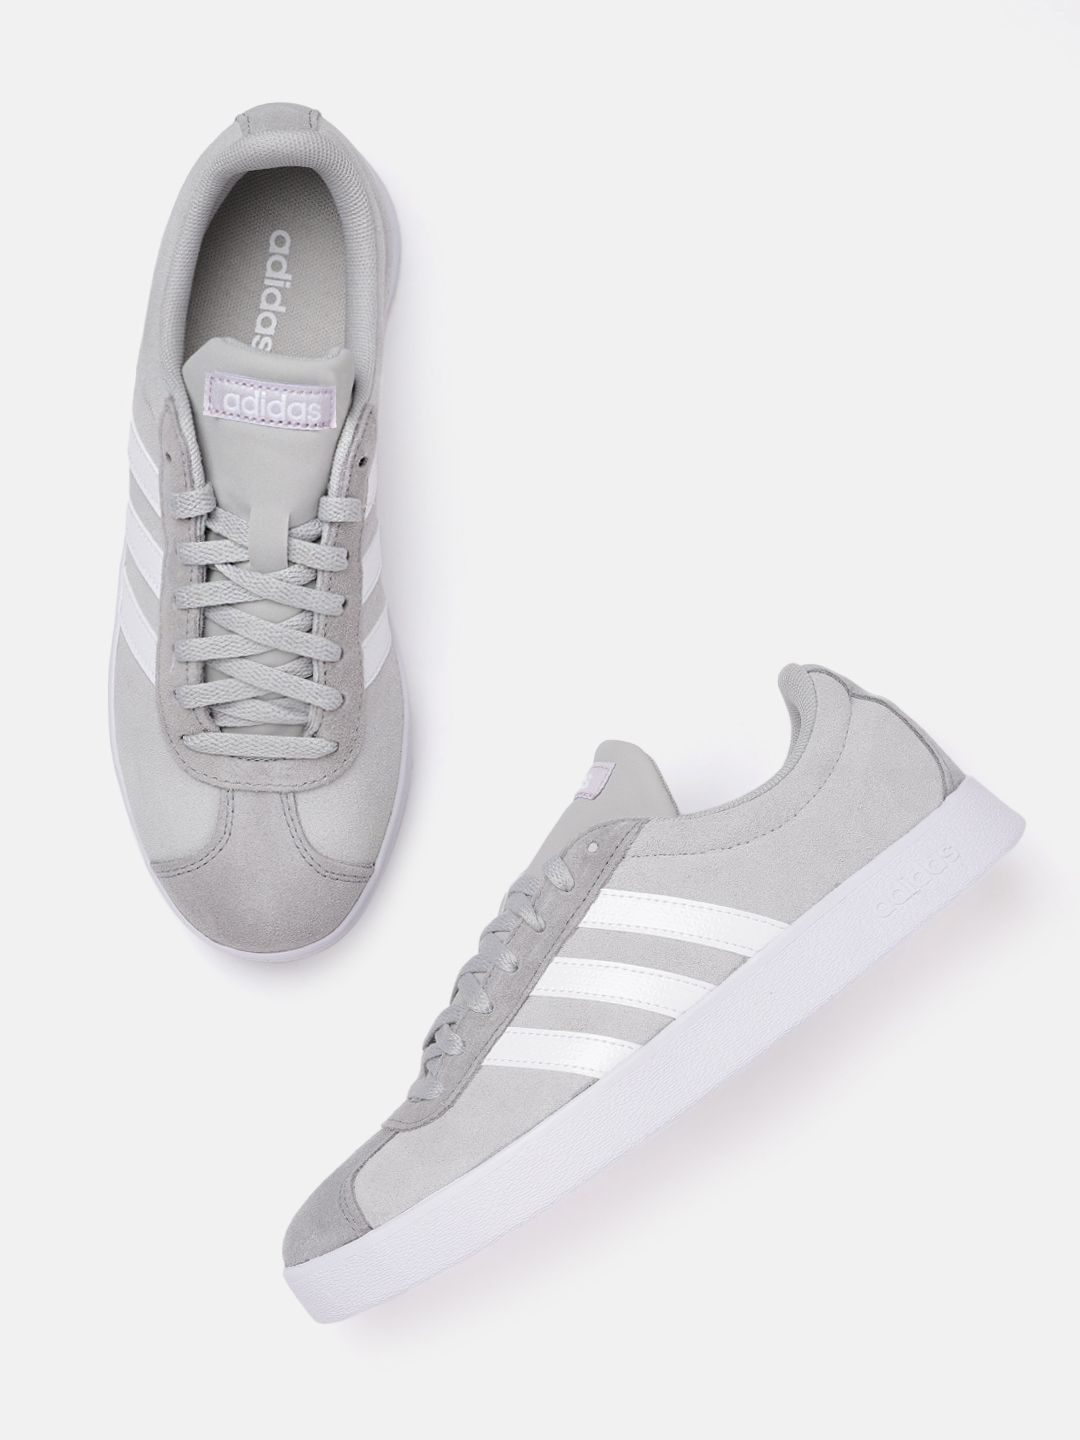 ADIDAS Women Grey Solid VL Court 2.0 Leather Skateboarding Shoes Price in India